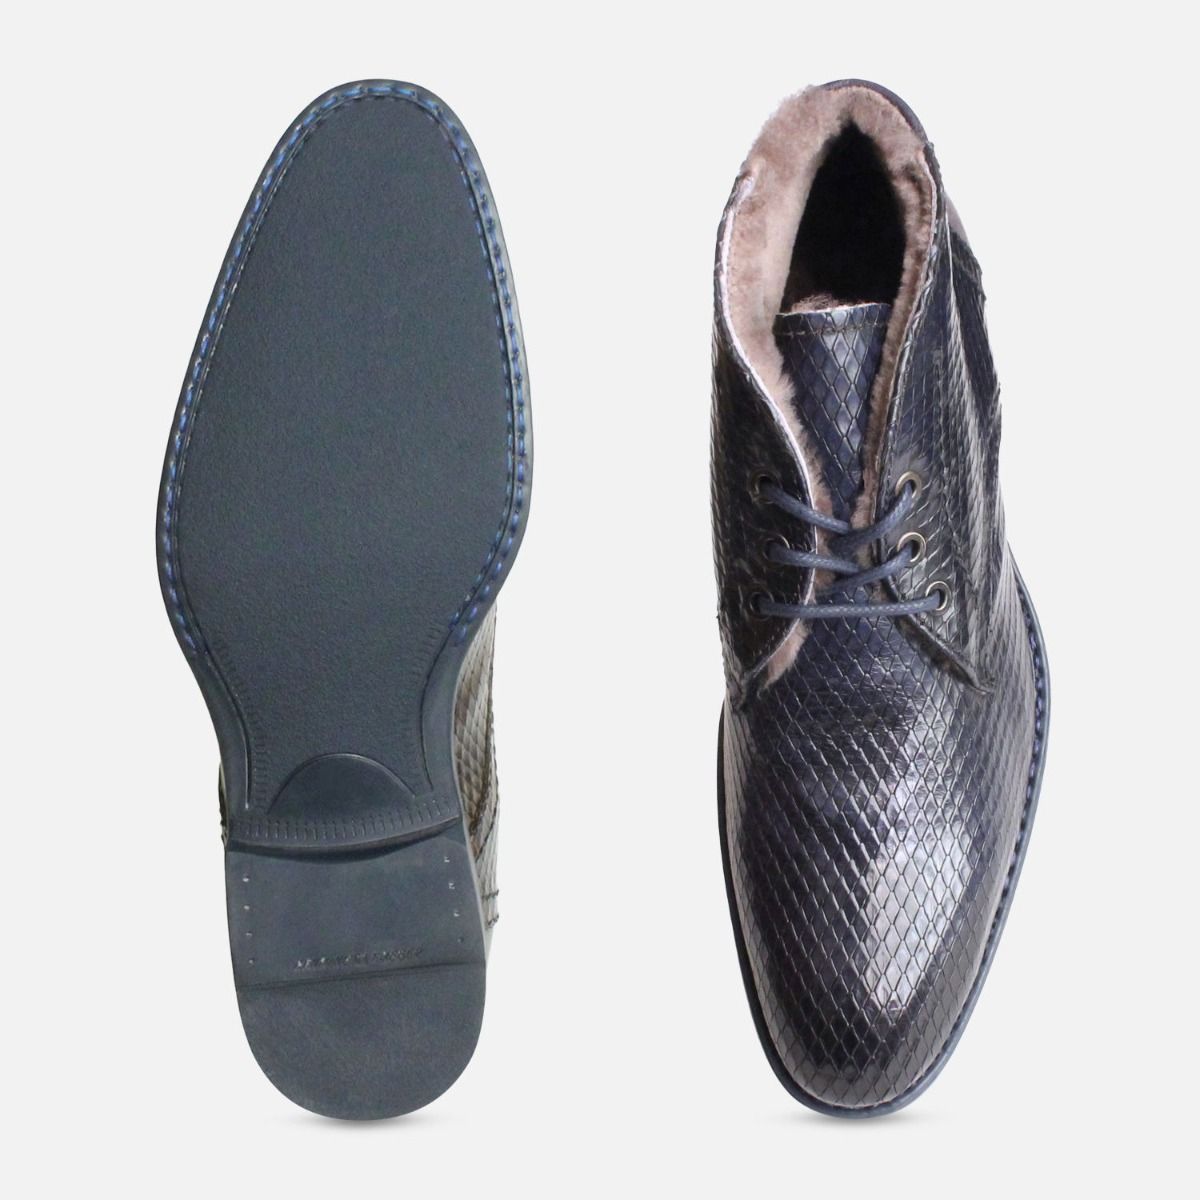 mens wool lined shoes